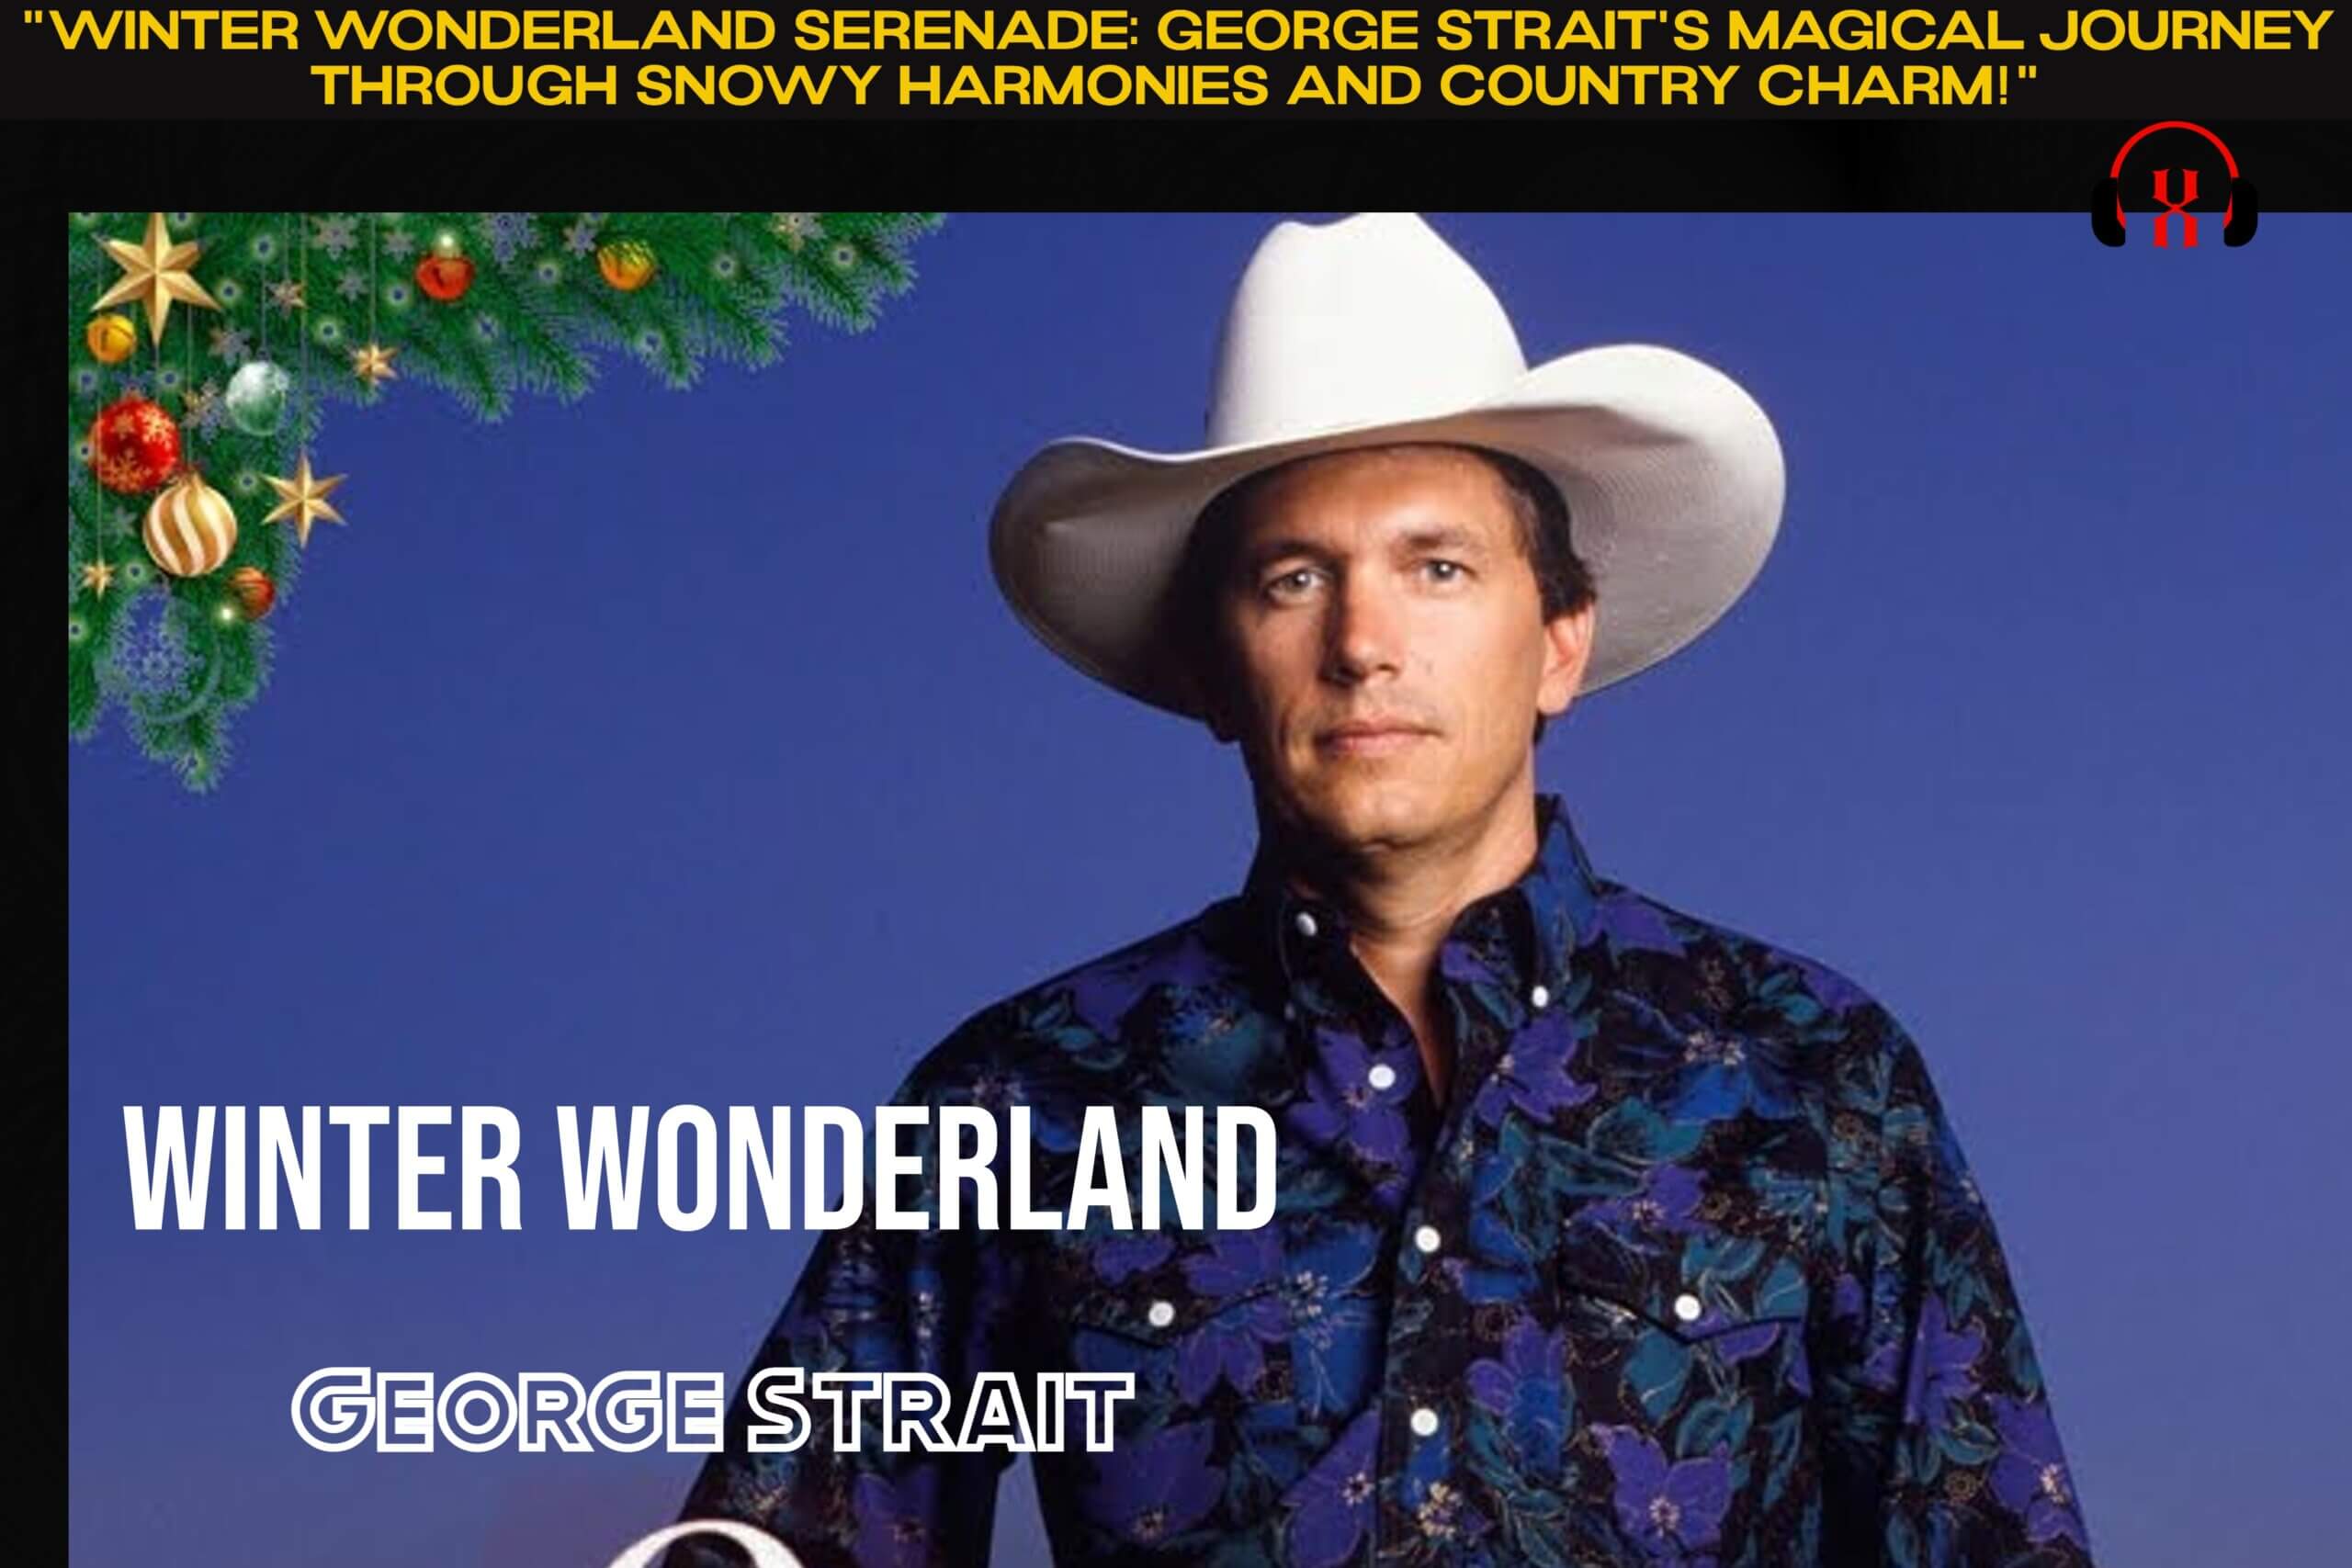 "Winter Wonderland Serenade: George Strait's Magical Journey through Snowy Harmonies and Country Charm!"